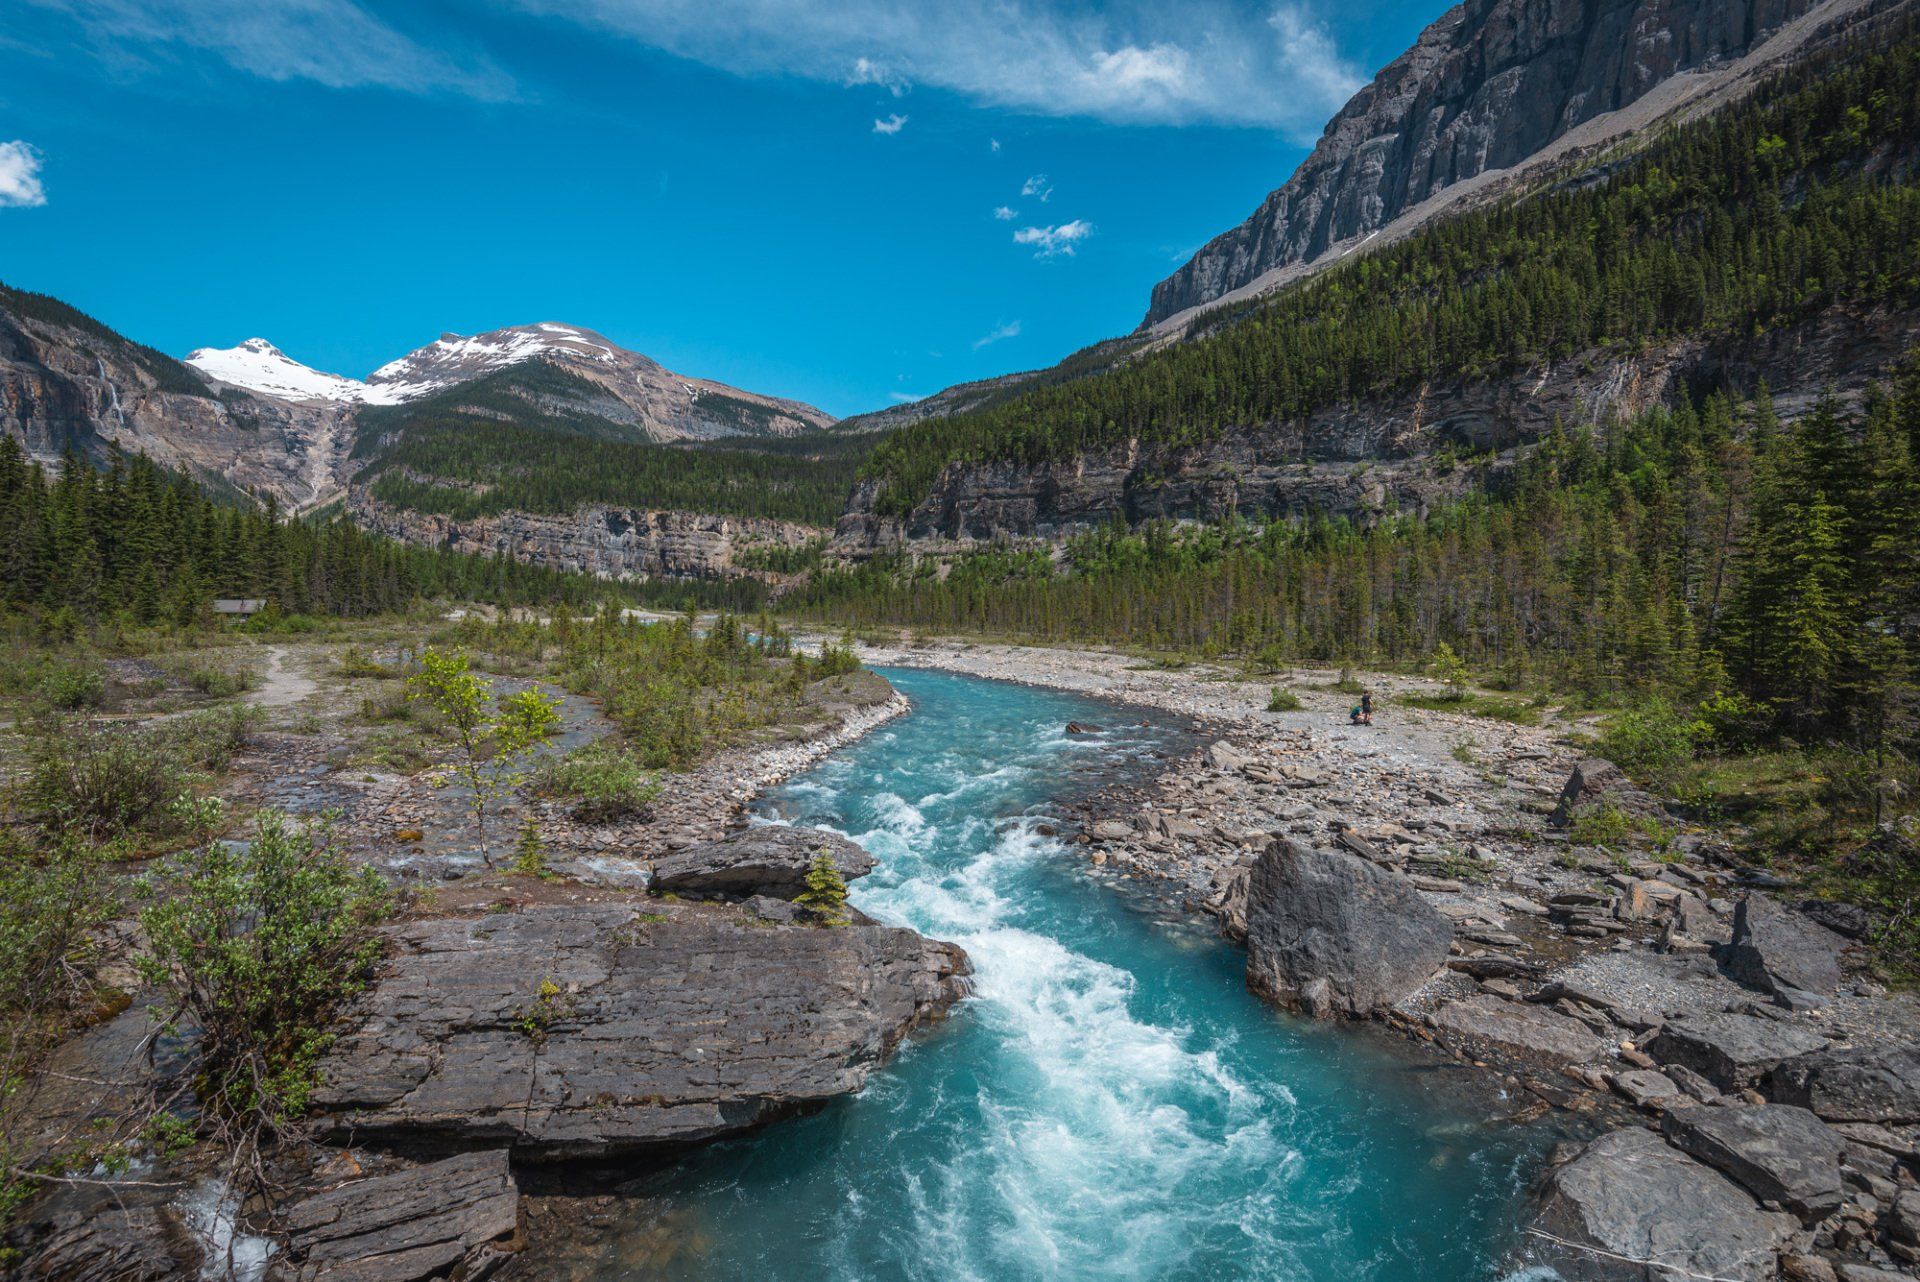 View near the Whitehorn camp, blue Berg river at mt Robson park, BC, Canada. Turquoise lake and mountains touched with first rays of morning sun